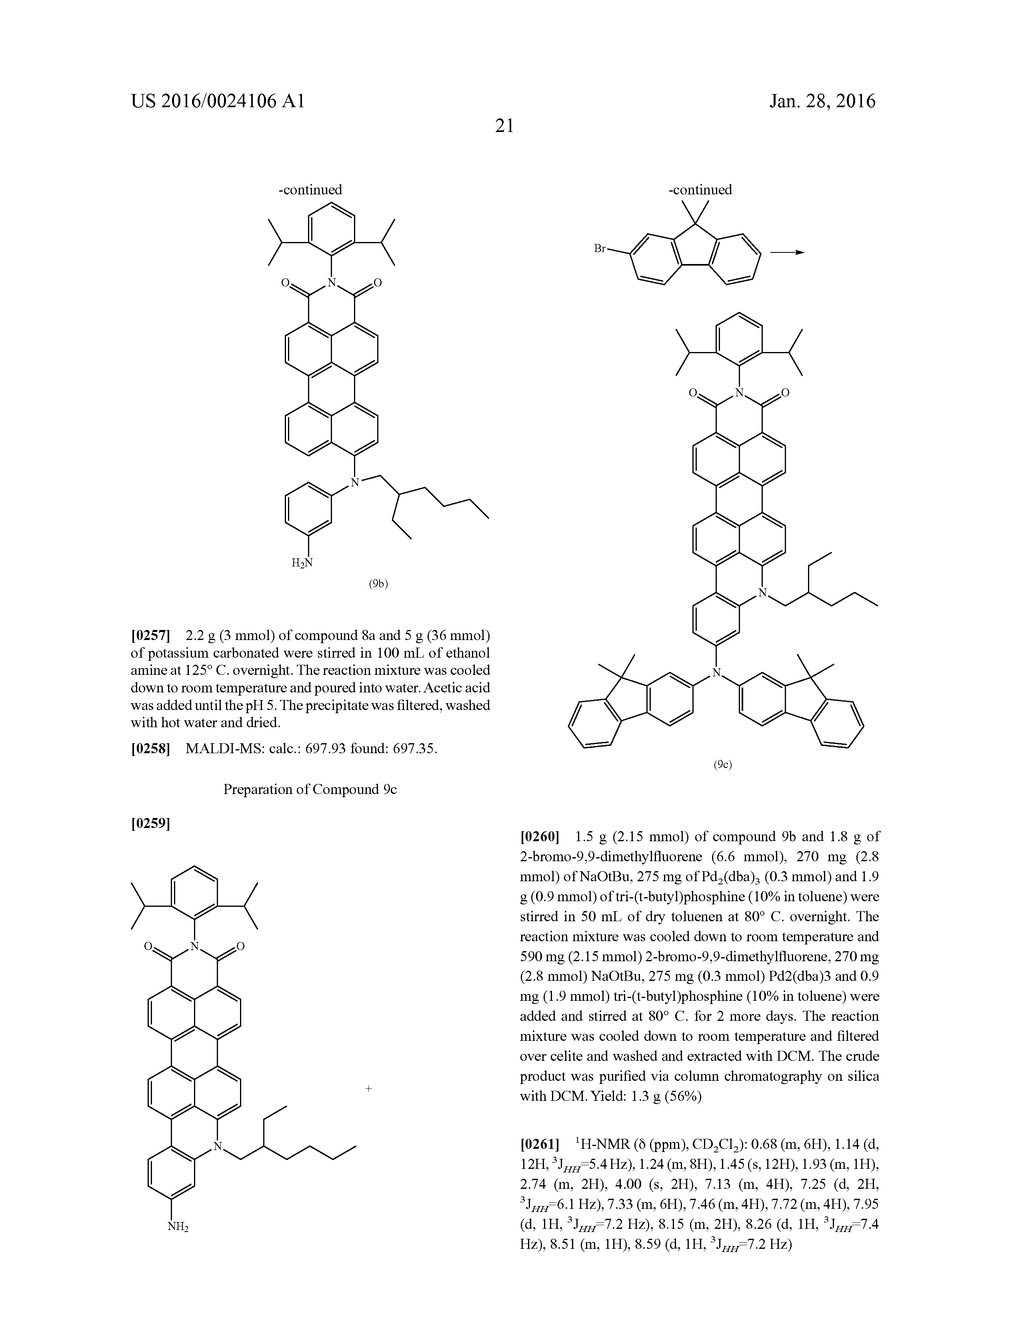 PERYLENEMONOIMIDE AND NAPHTHALENEMONOIMIDE DERIVATIVES AND THEIR USE IN     DYE-SENSITIZED SOLAR CELLS - diagram, schematic, and image 29